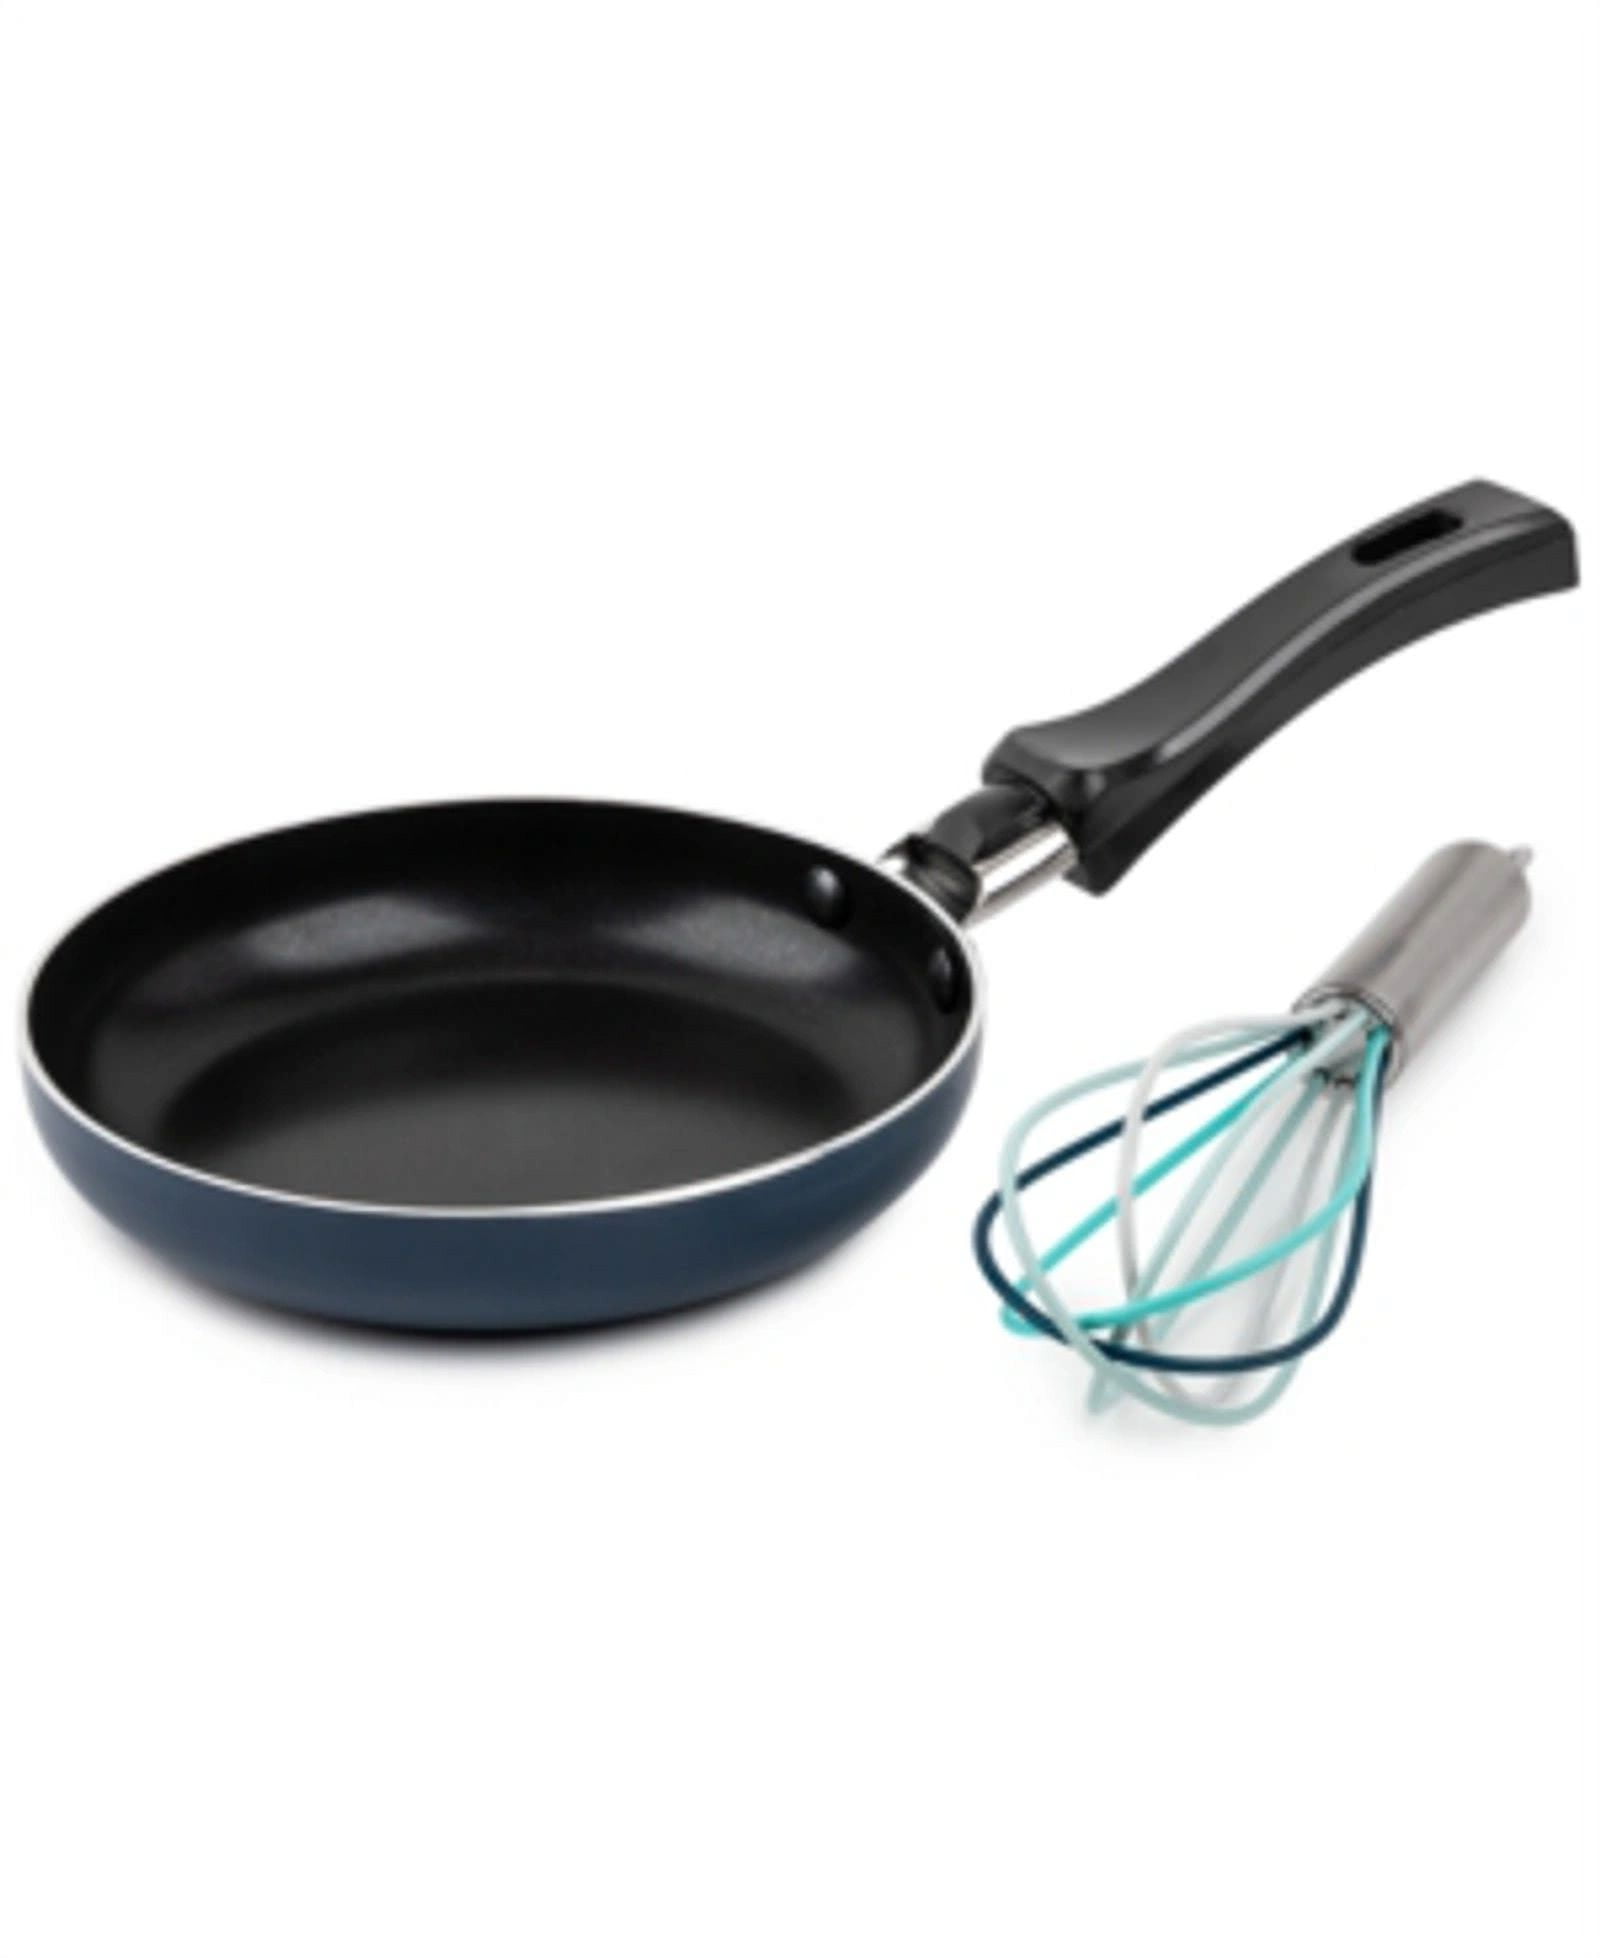 BKLYN Steel Co. Ceramic Non-stick 8 Frying Pan New Cookware Kitchen  Nonstick Ce